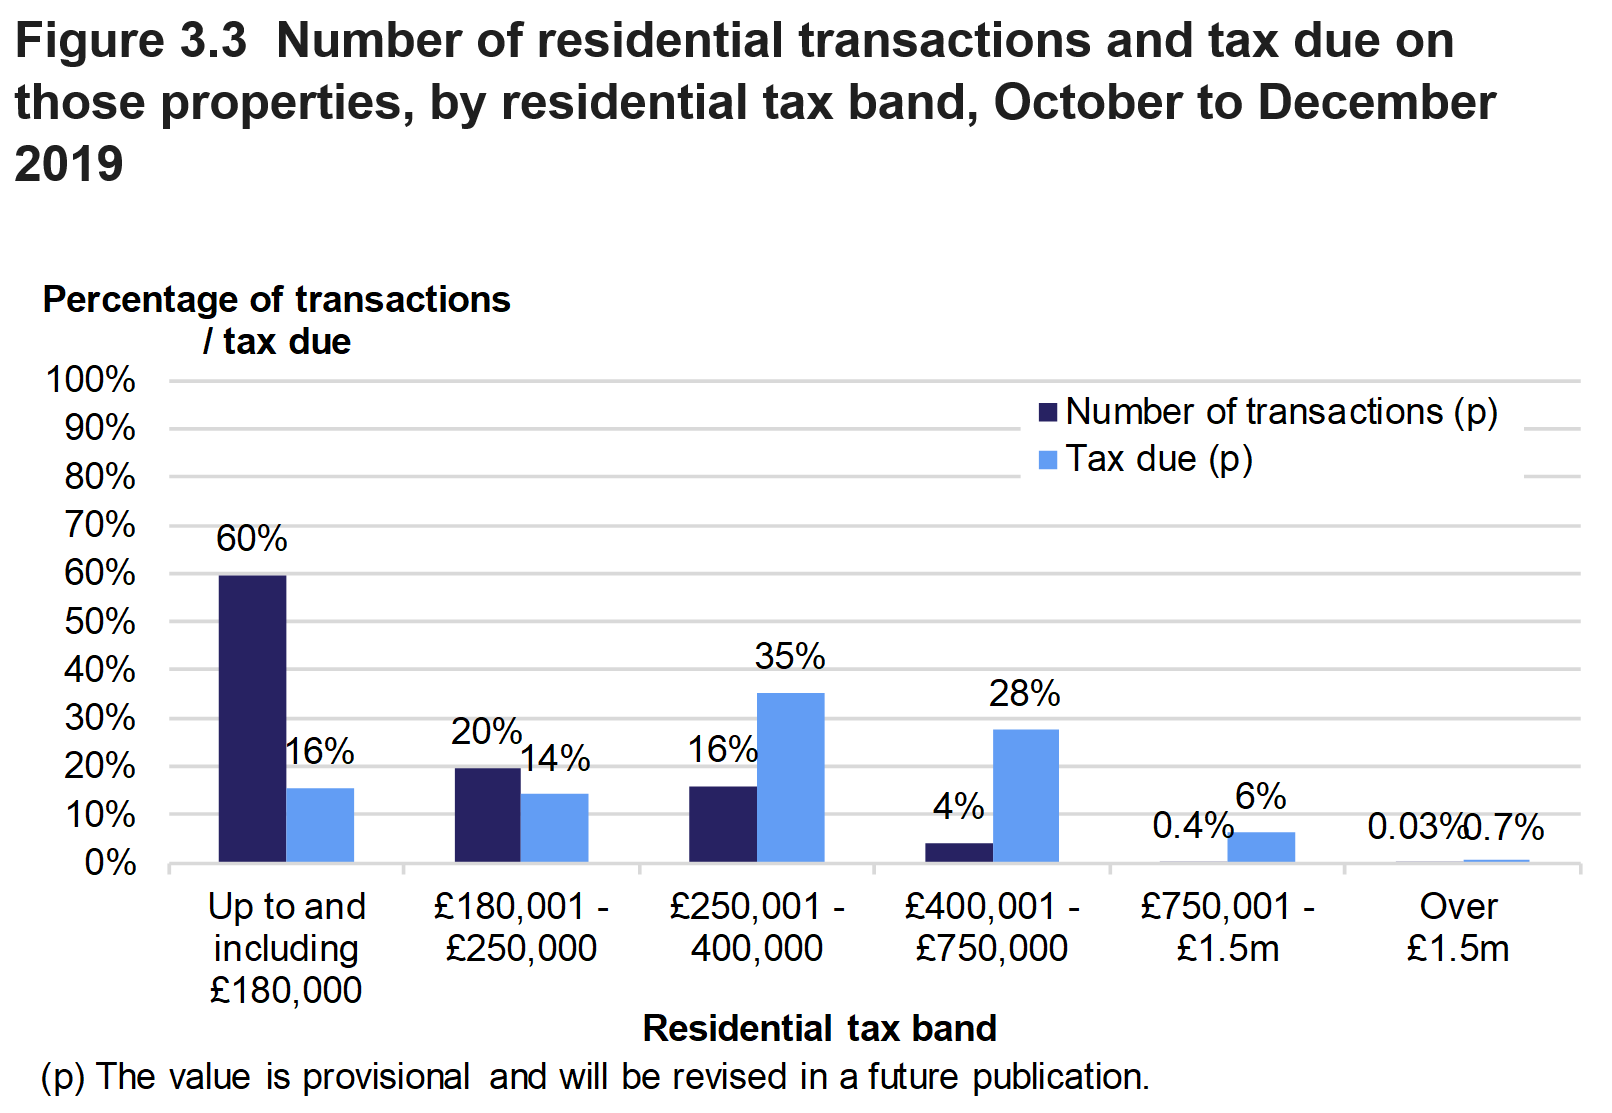 Figure 3.3 shows the number of residential transactions and amount of tax due, by residential tax band. Data is presented as the percentage of transactions or tax due and relates to transactions effective in October to December 2019.